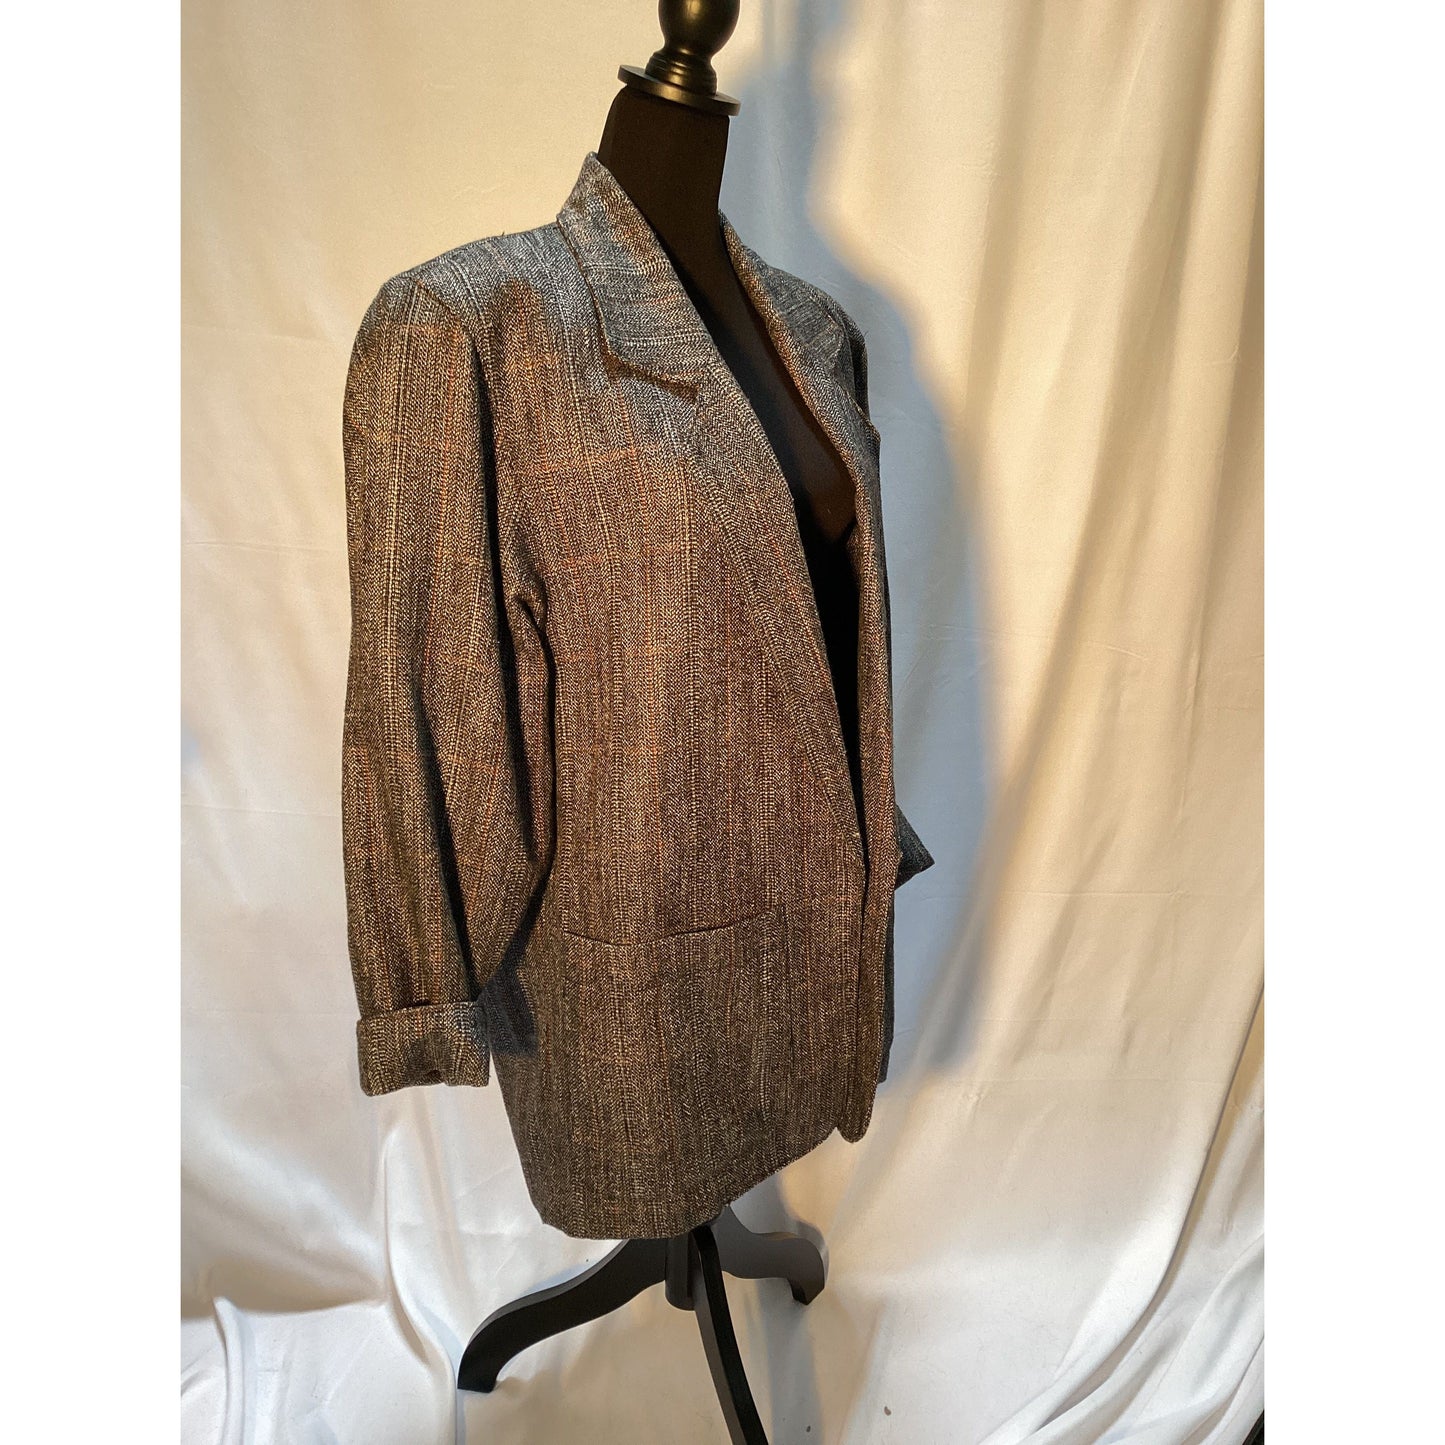 Oversized wool blazer, brown with stripes with pockets size 14/15